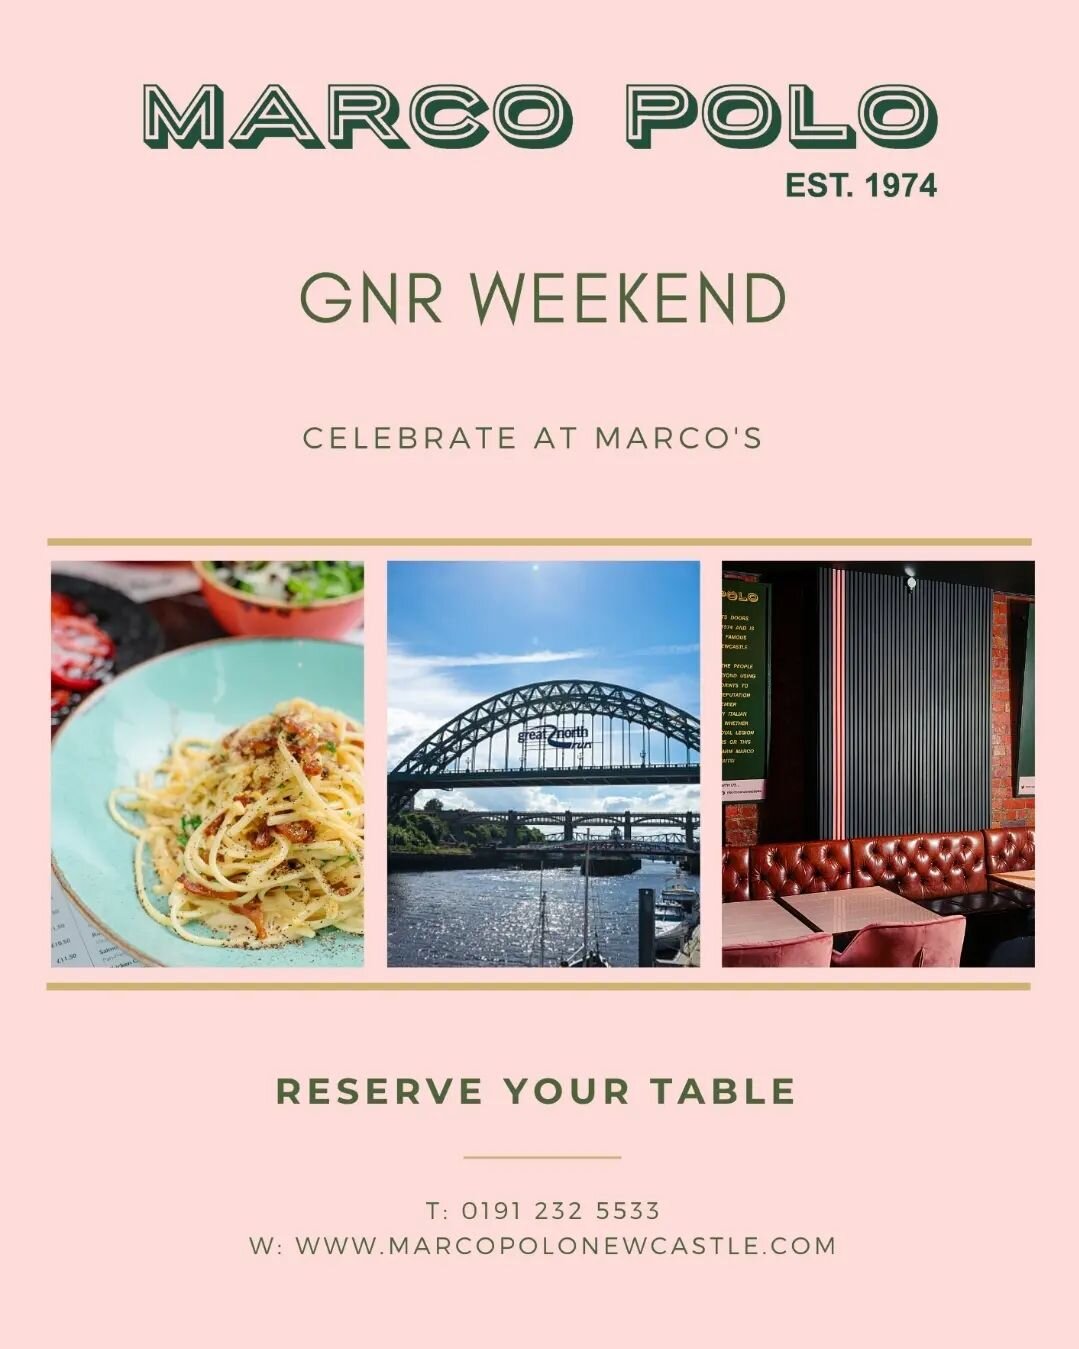 The big event is almost here!

Book your table for The Great North Run weekend. We'll be open Friday, Saturday AND Sunday! 🏃&zwj;♀️👟🎽🍝🍕

#gnr22 #greatnorthrun #thetyneisnow #geordieland #geordies #nefoodies #newcastlefoodies #nefoodies #newcastl